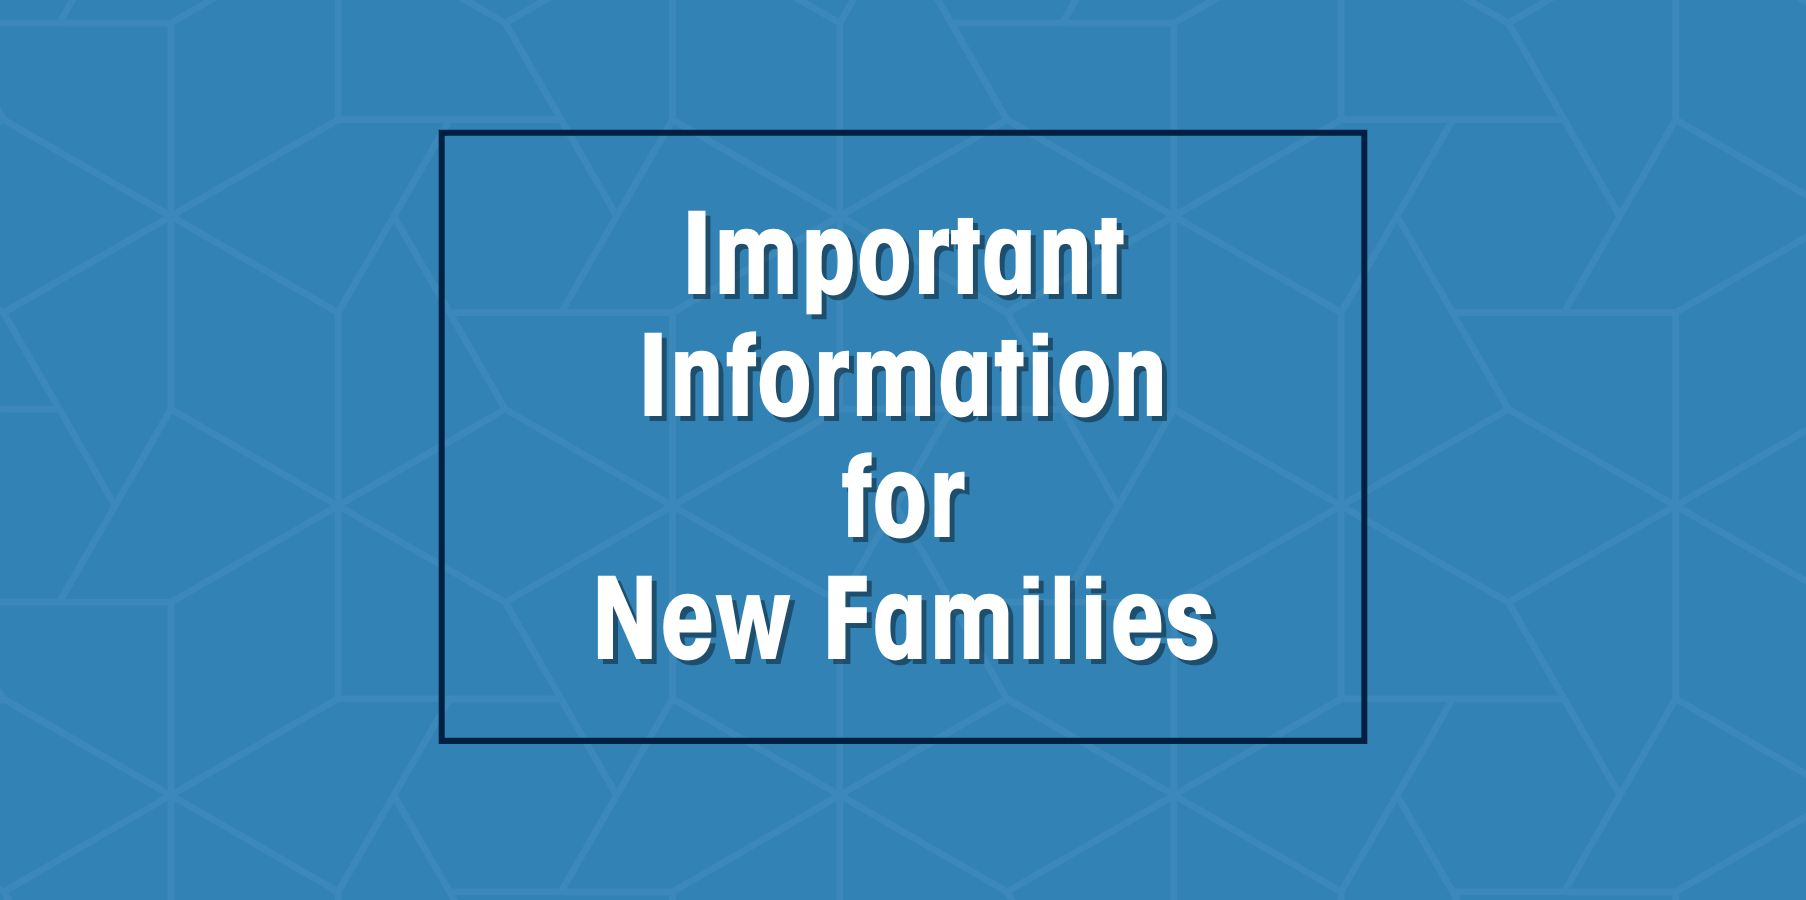 Important Information for New Families